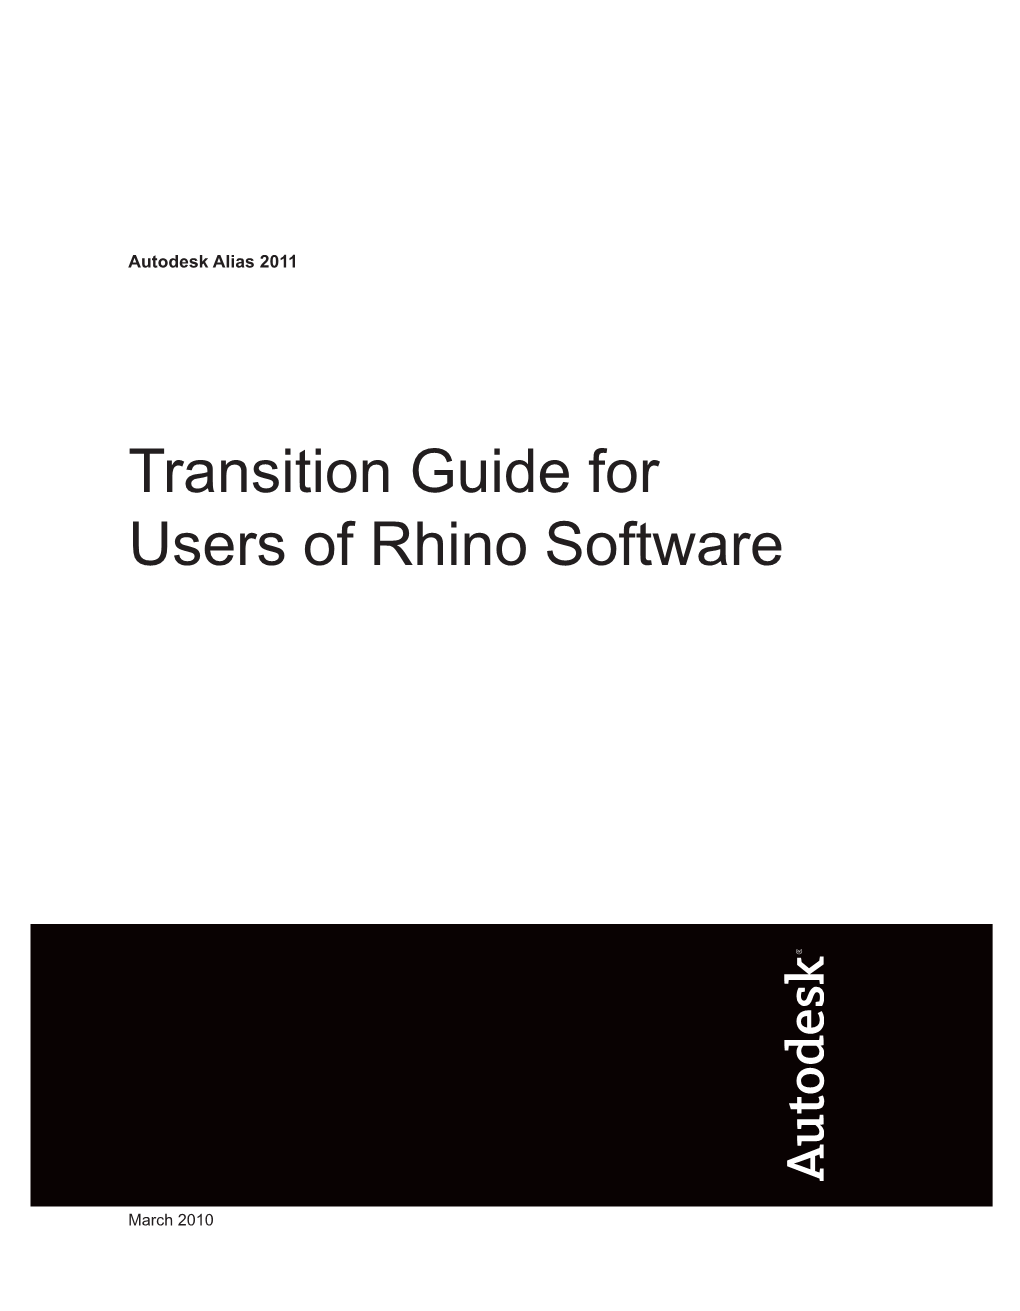 Transition Guide for Users of Rhino Software